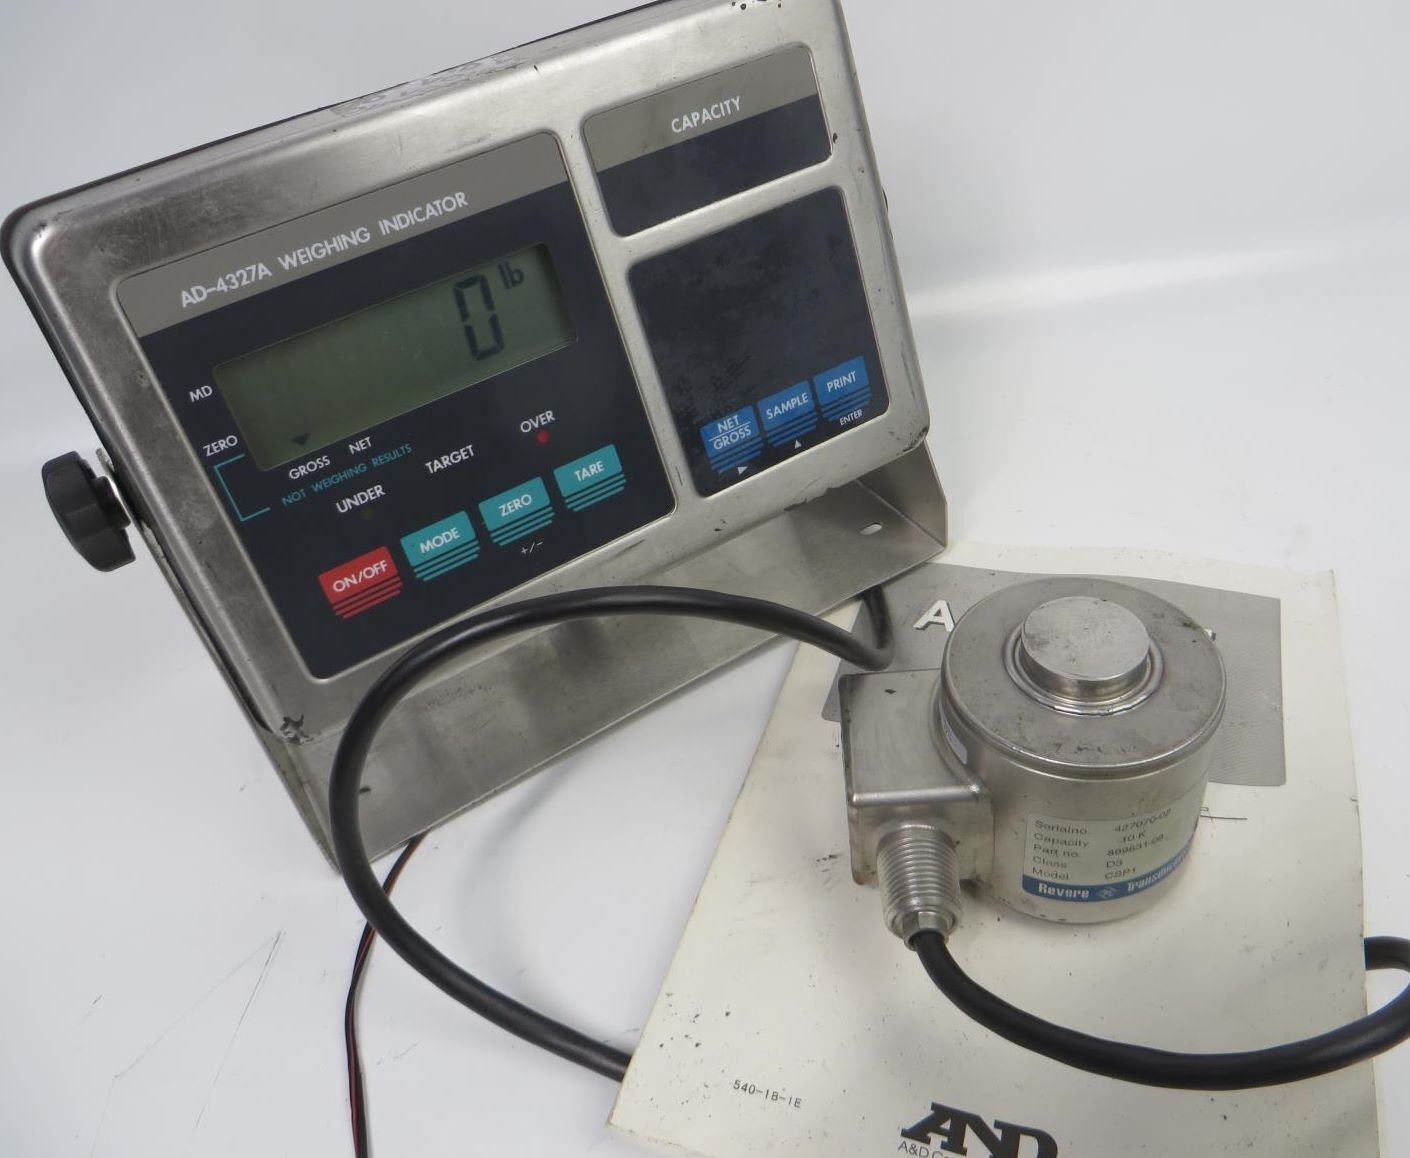 A&d Ad-4327a Weighing Indicator Scale Display W/ Revere Csp-d3-10k Transducer